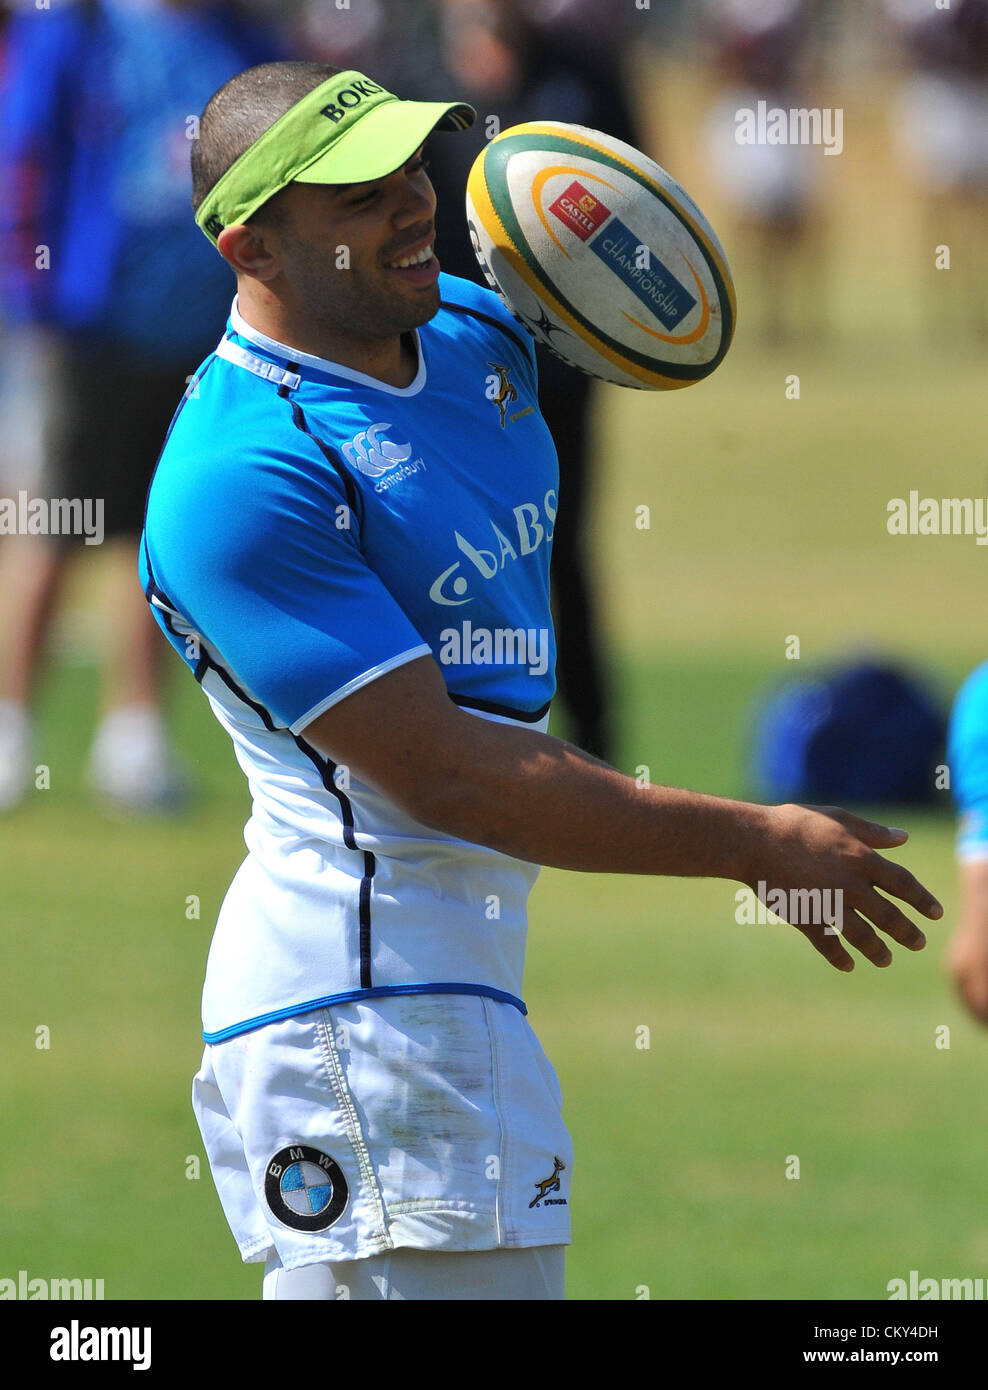 JOHANNESBURG, SOUTH AFRICA - SEPTEMBER 01, Bryan Habana during the South African national rugby team field session and media conference at KES on September 01, 2012 in Johannesburg, South Africa Photo by Duif du Toit / Gallo Images Stock Photo